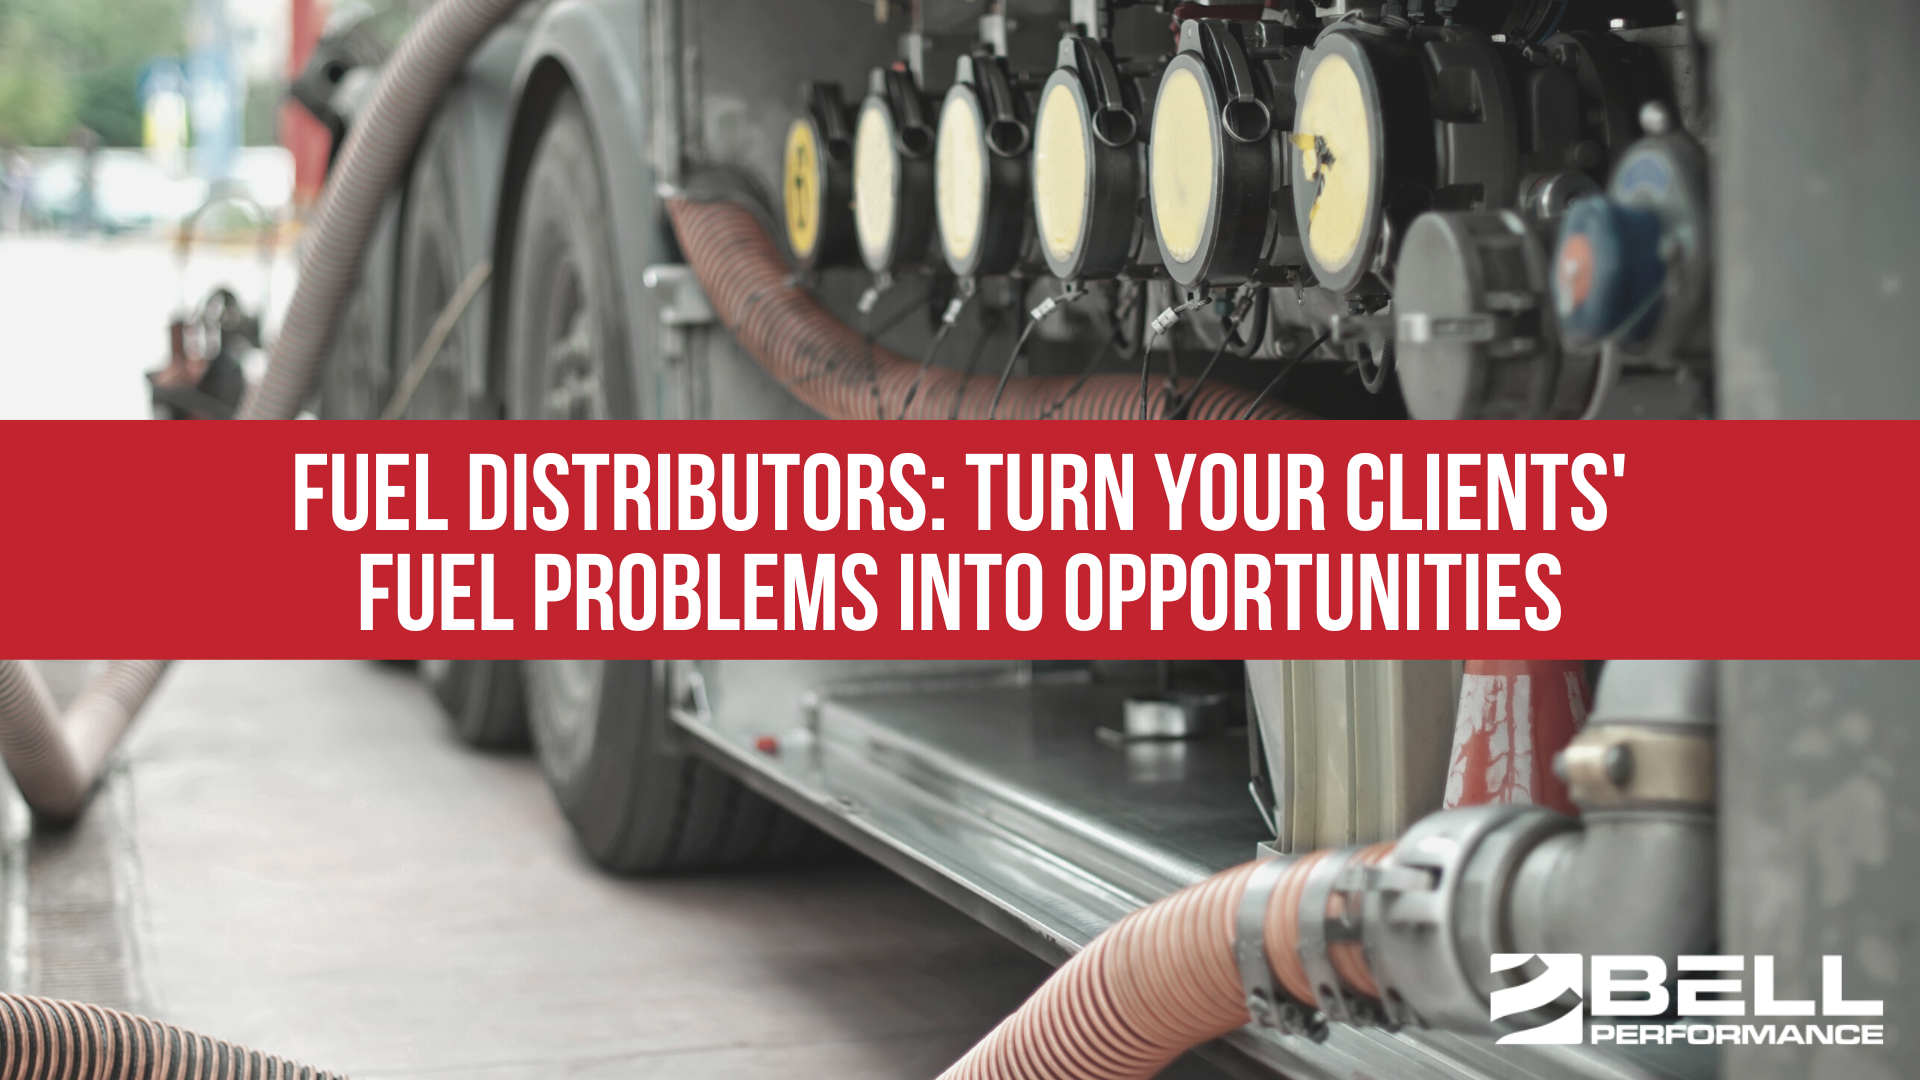 Fuel Distributors: Turn Your Clients' Fuel Problems Into Opportunities